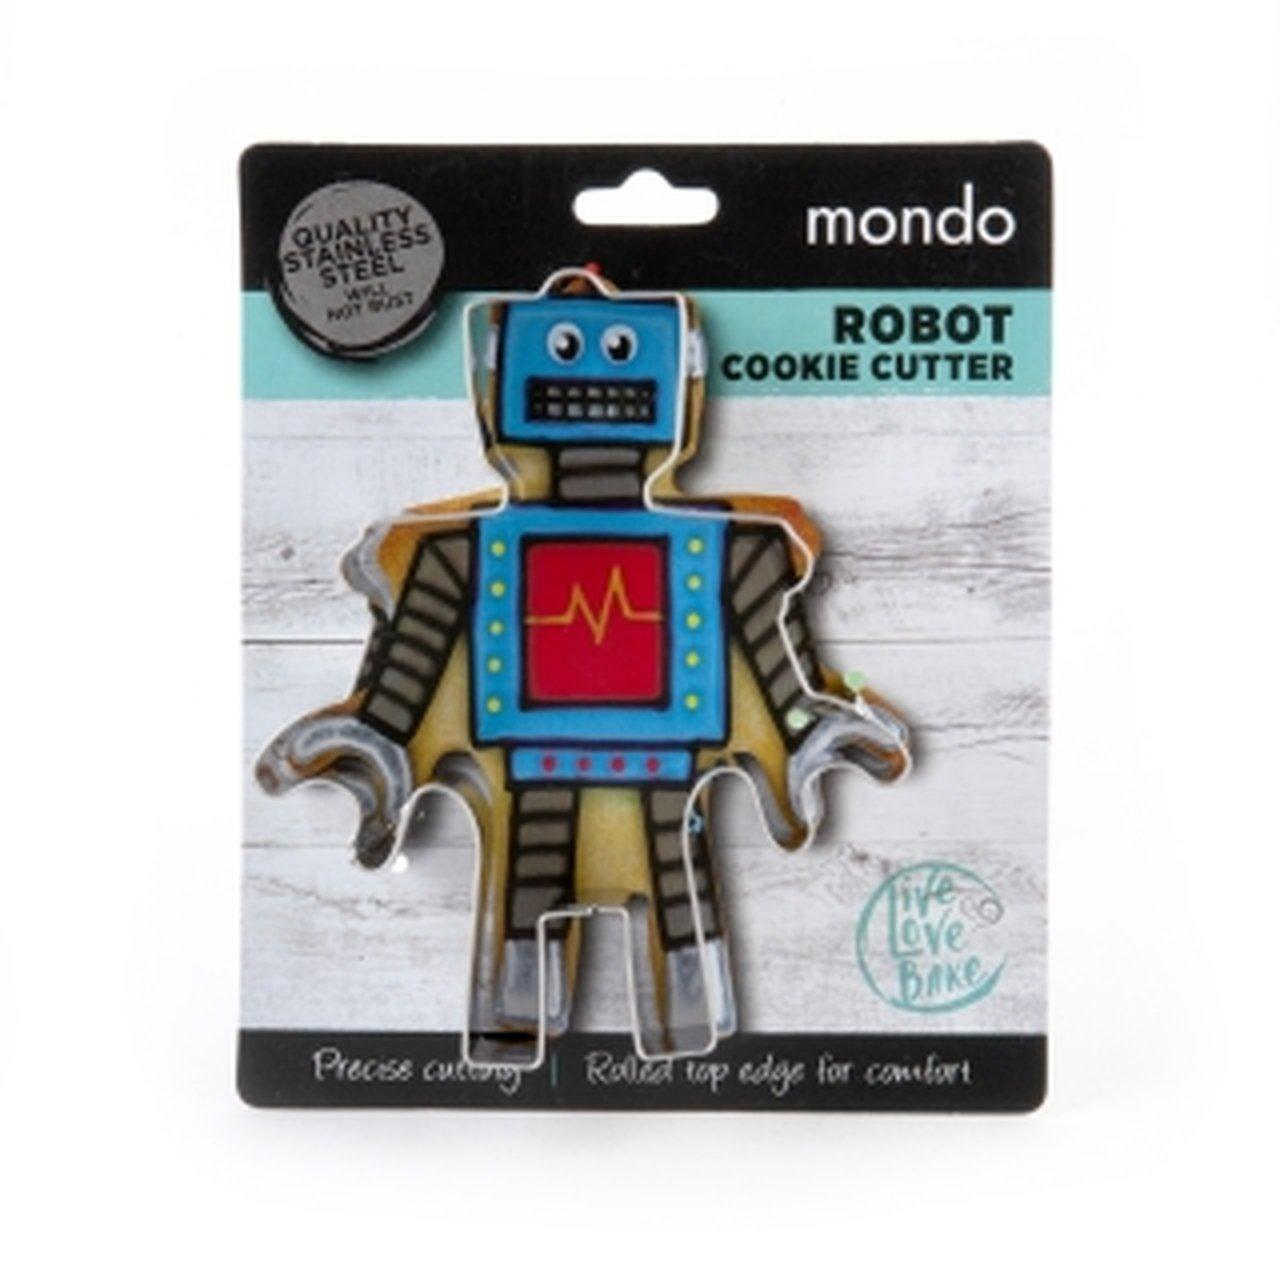 ROBOT Mondo Cookie Cutter - Cake Decorating Central